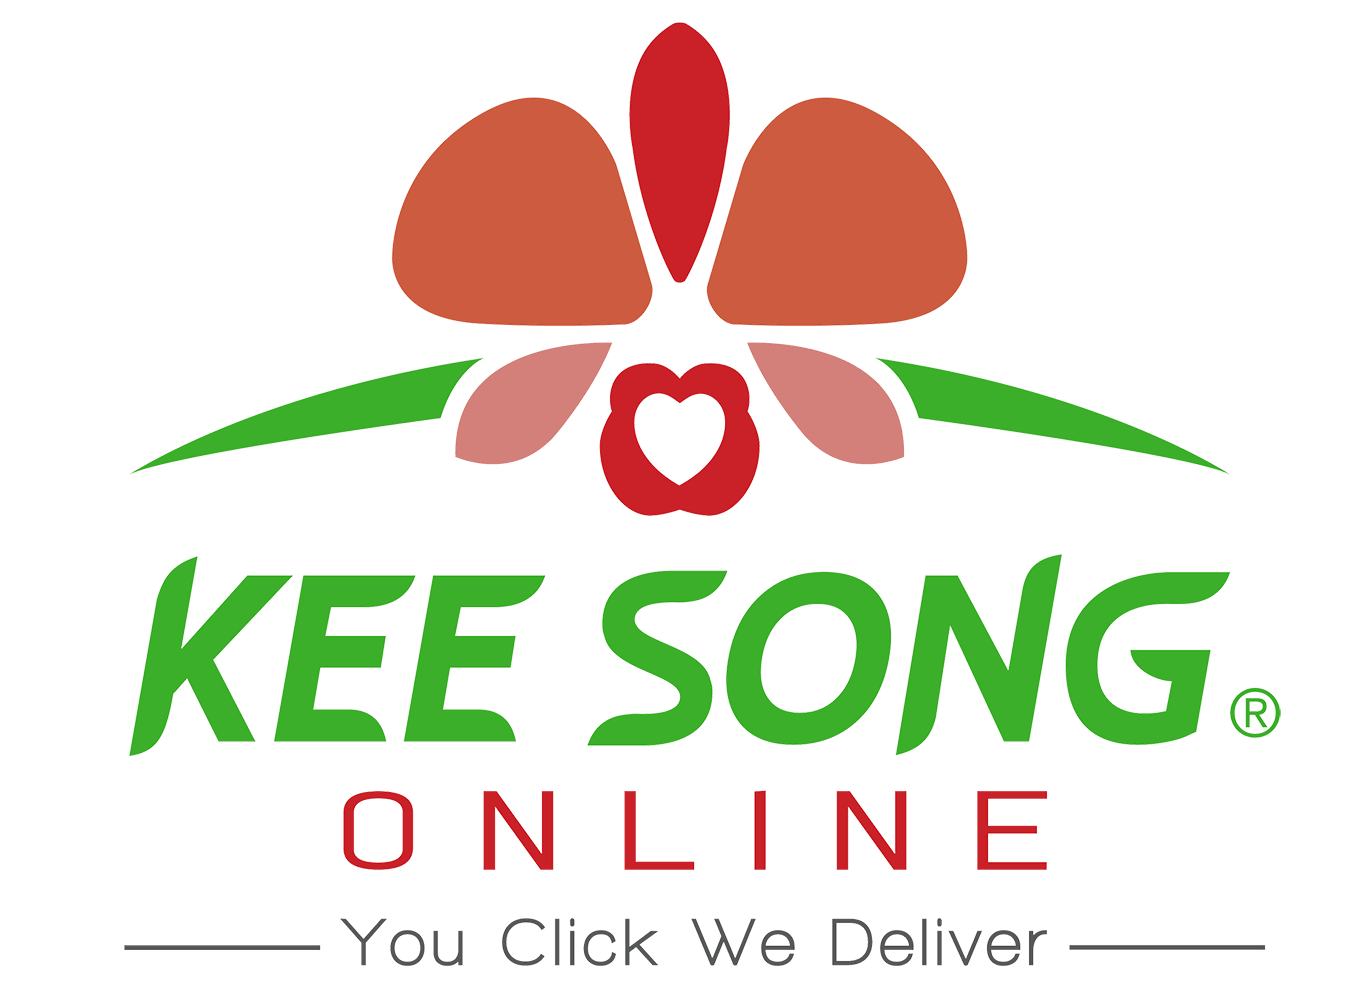 Kee song chicken